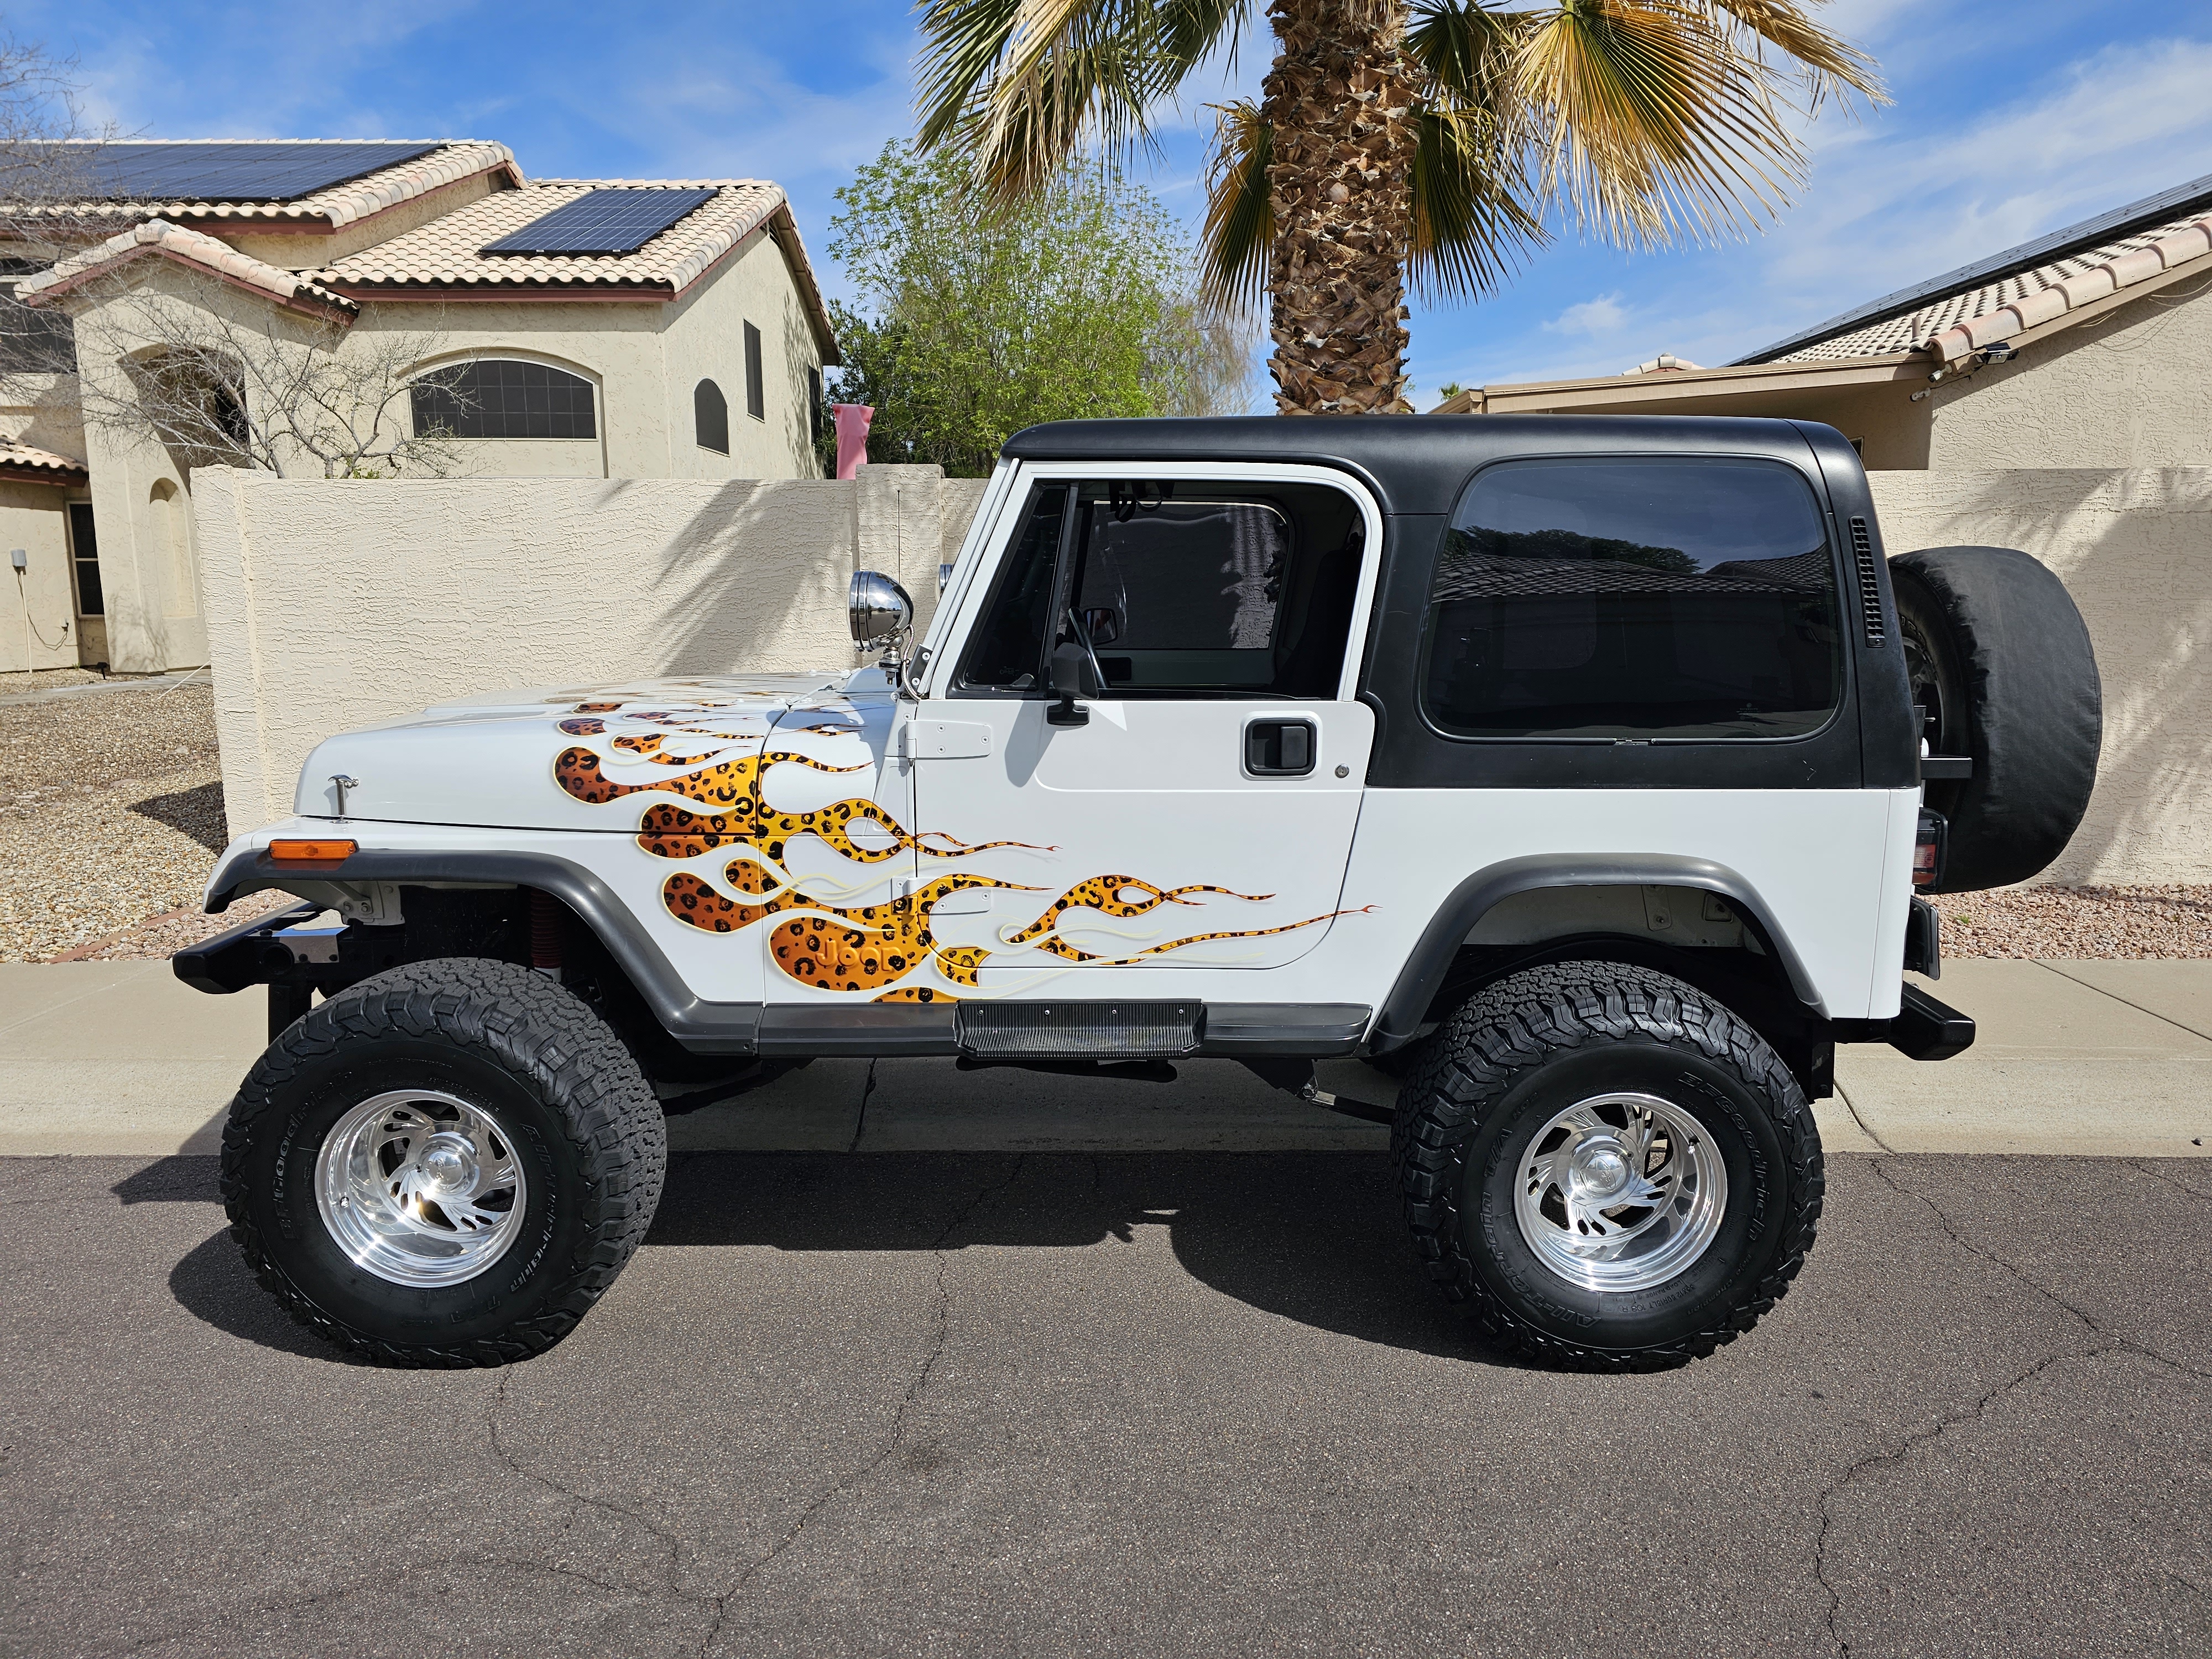 Used 1992 Jeep Wrangler for Sale Right Now - Autotrader